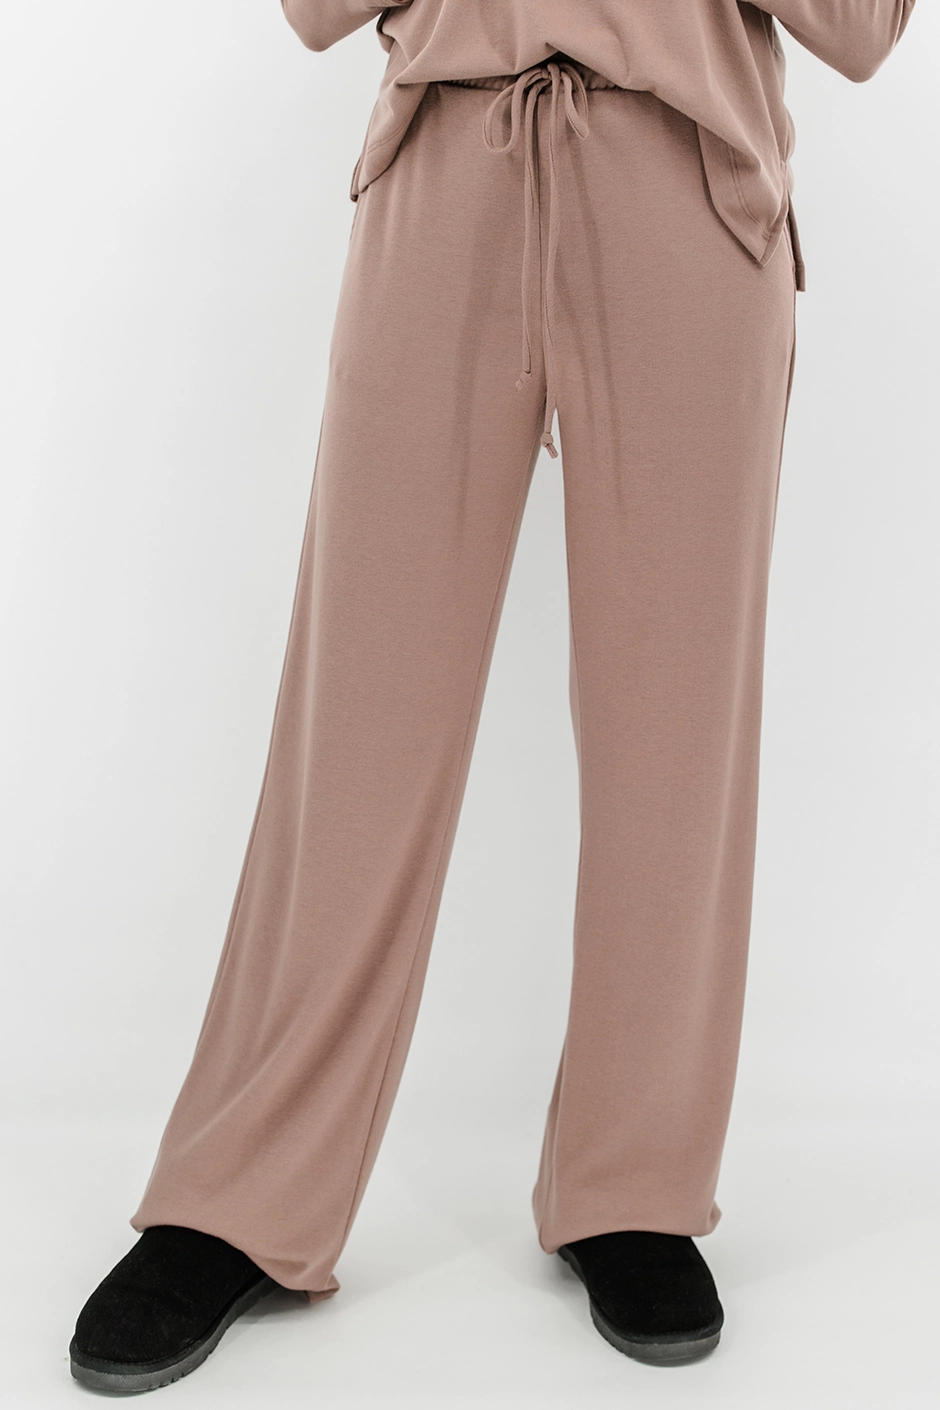 A Perfect Day Lounge Pants